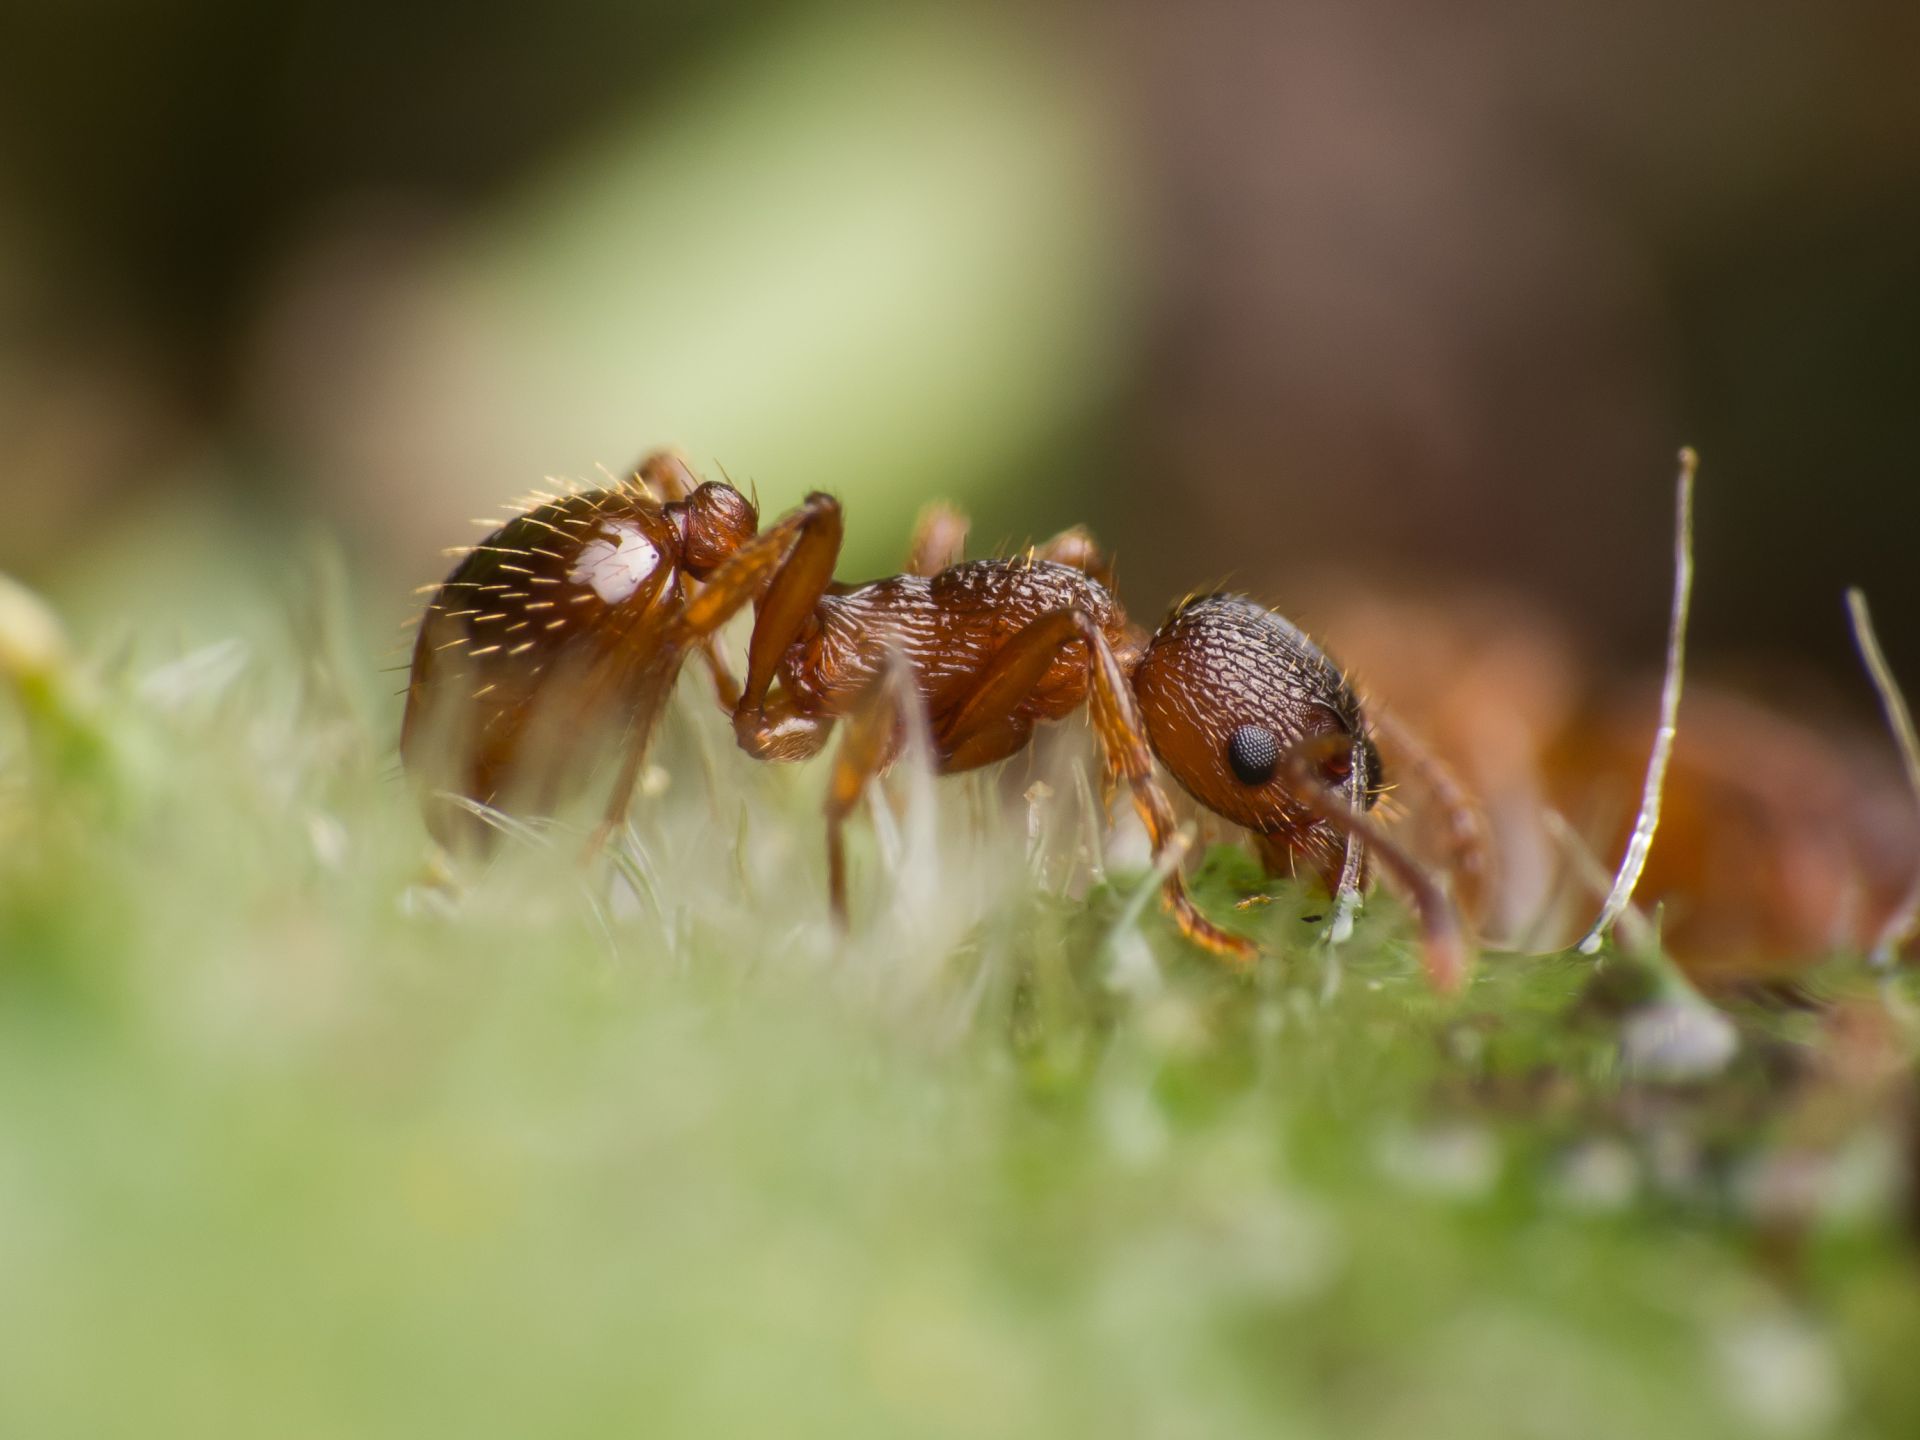 Myrmica sp. worker, lateral view